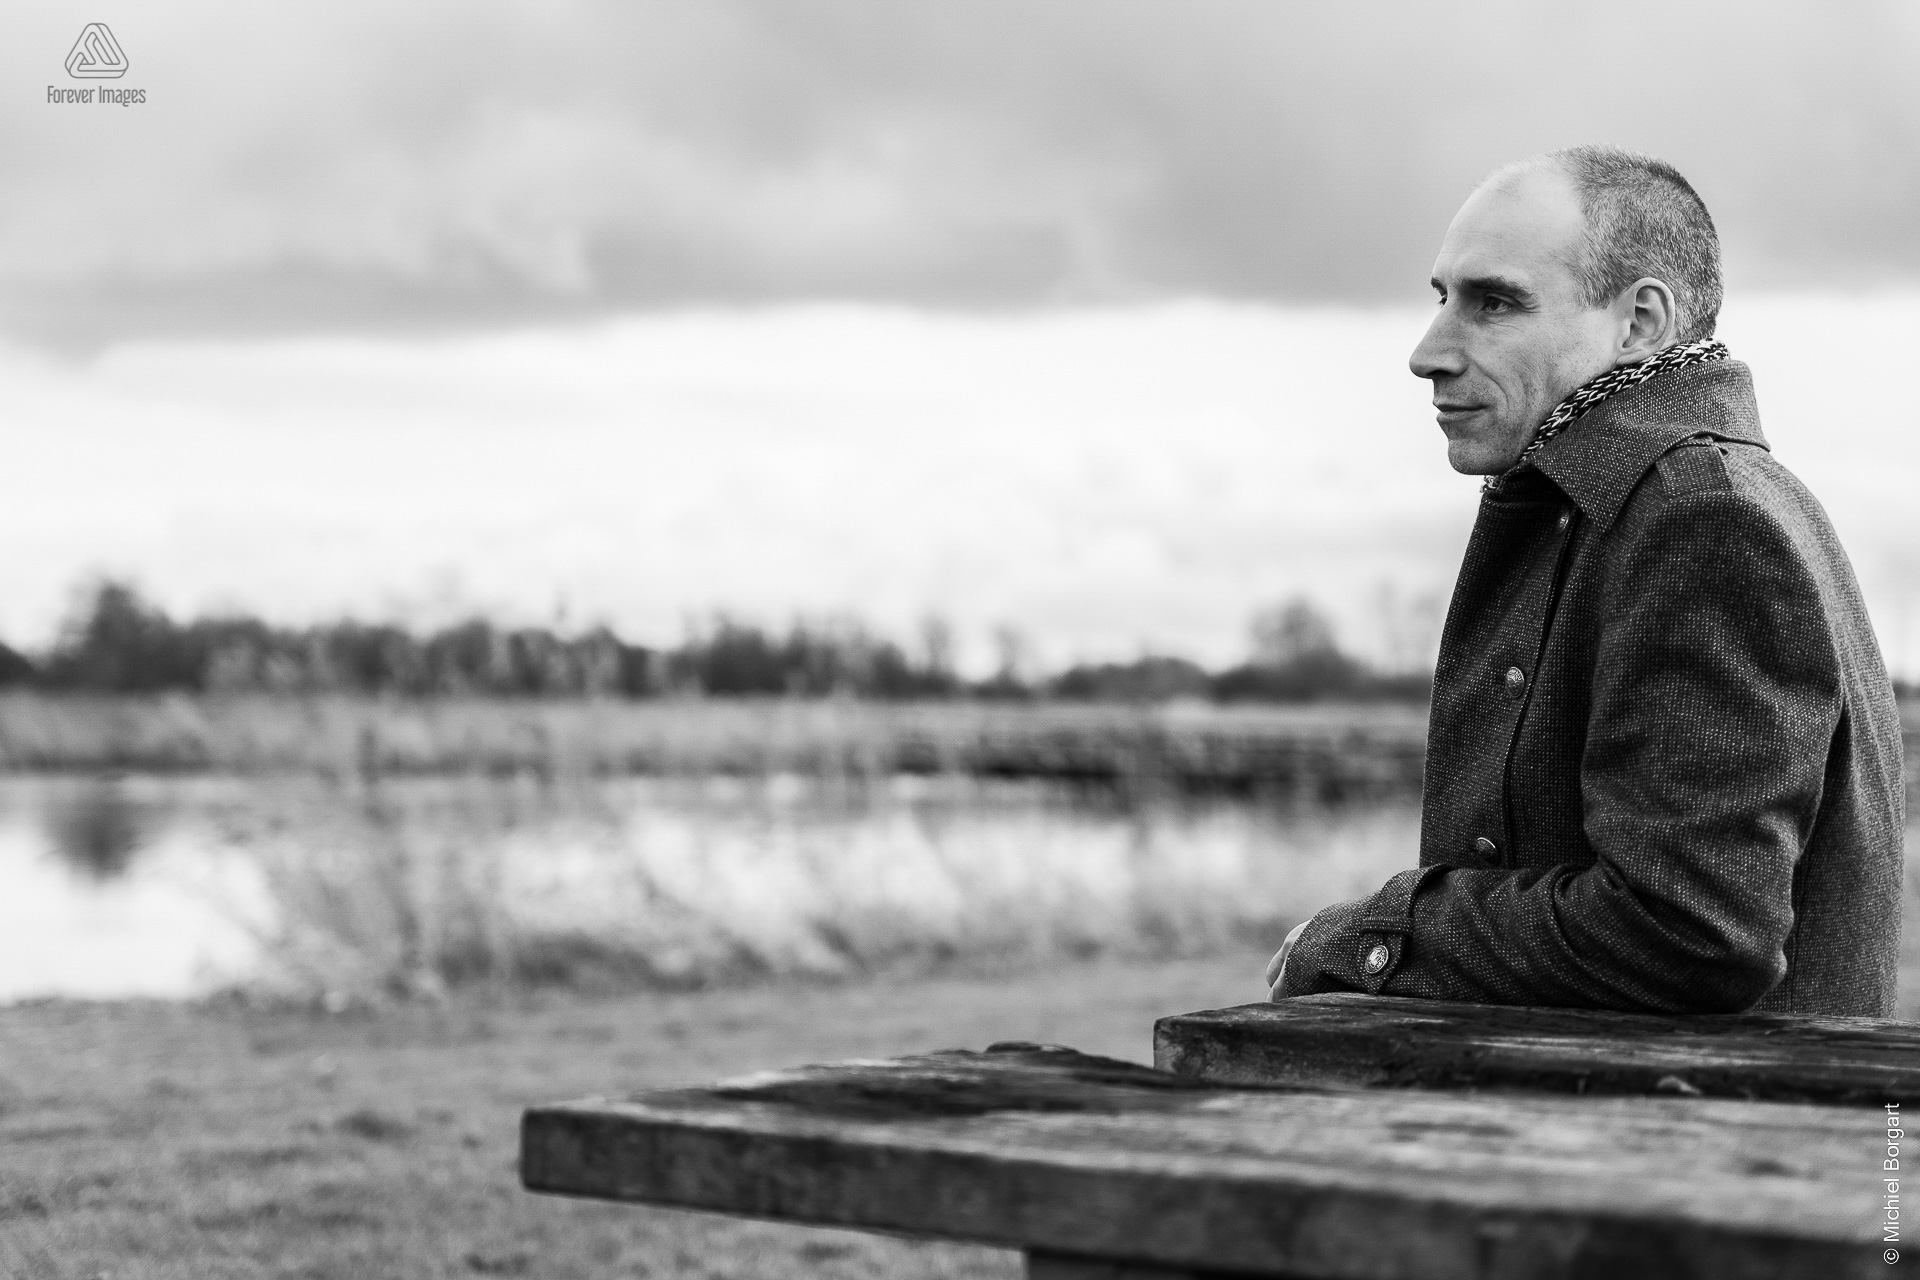 Portrait photo black and white B&W man sitting at wooden table by water | Robin Het Twiske De Stootersplas | Portrait Photographer Michiel Borgart - Forever Images.